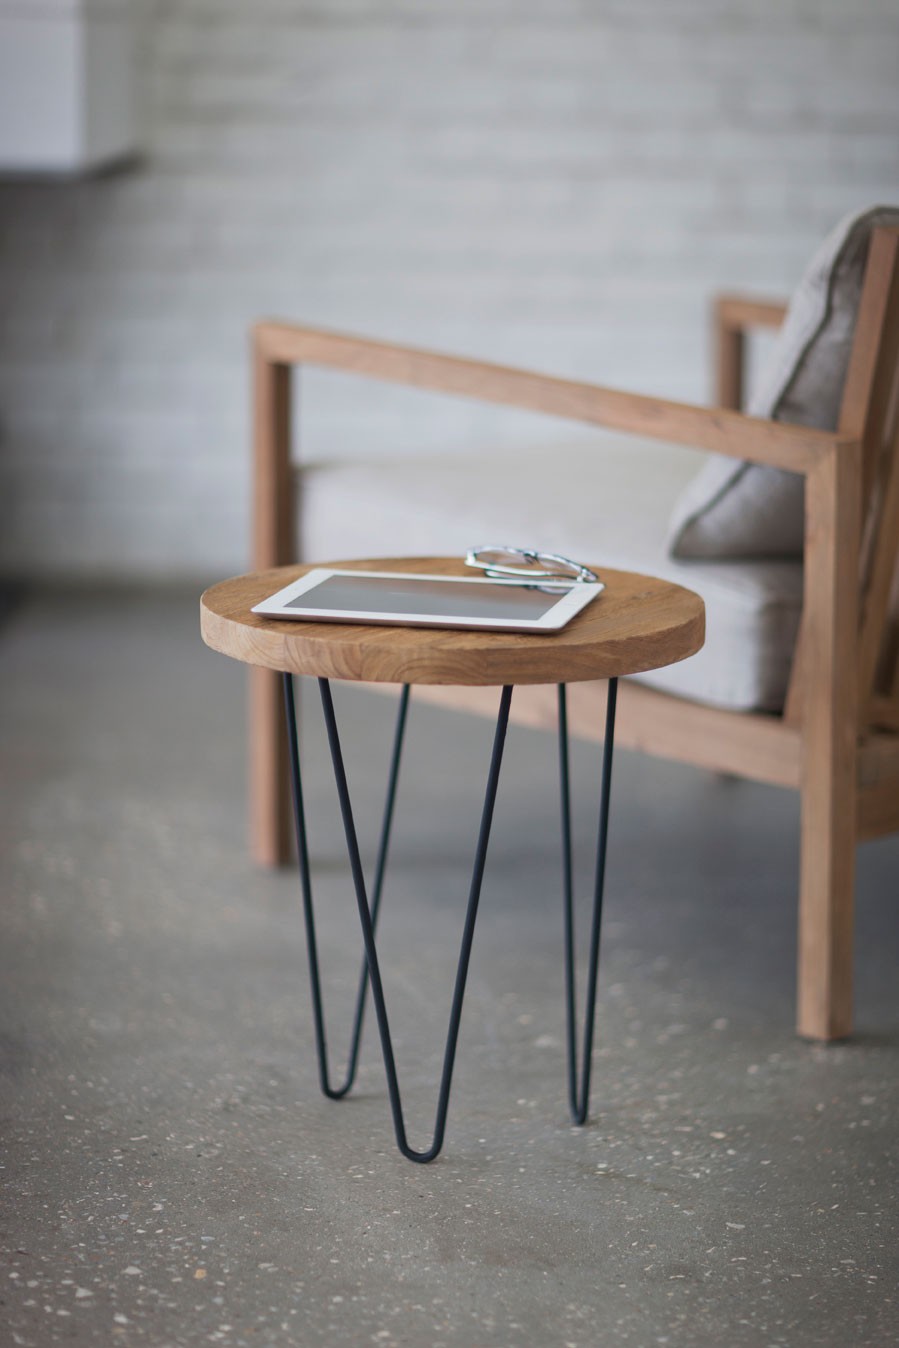 stool table hairpin legs from trunk home